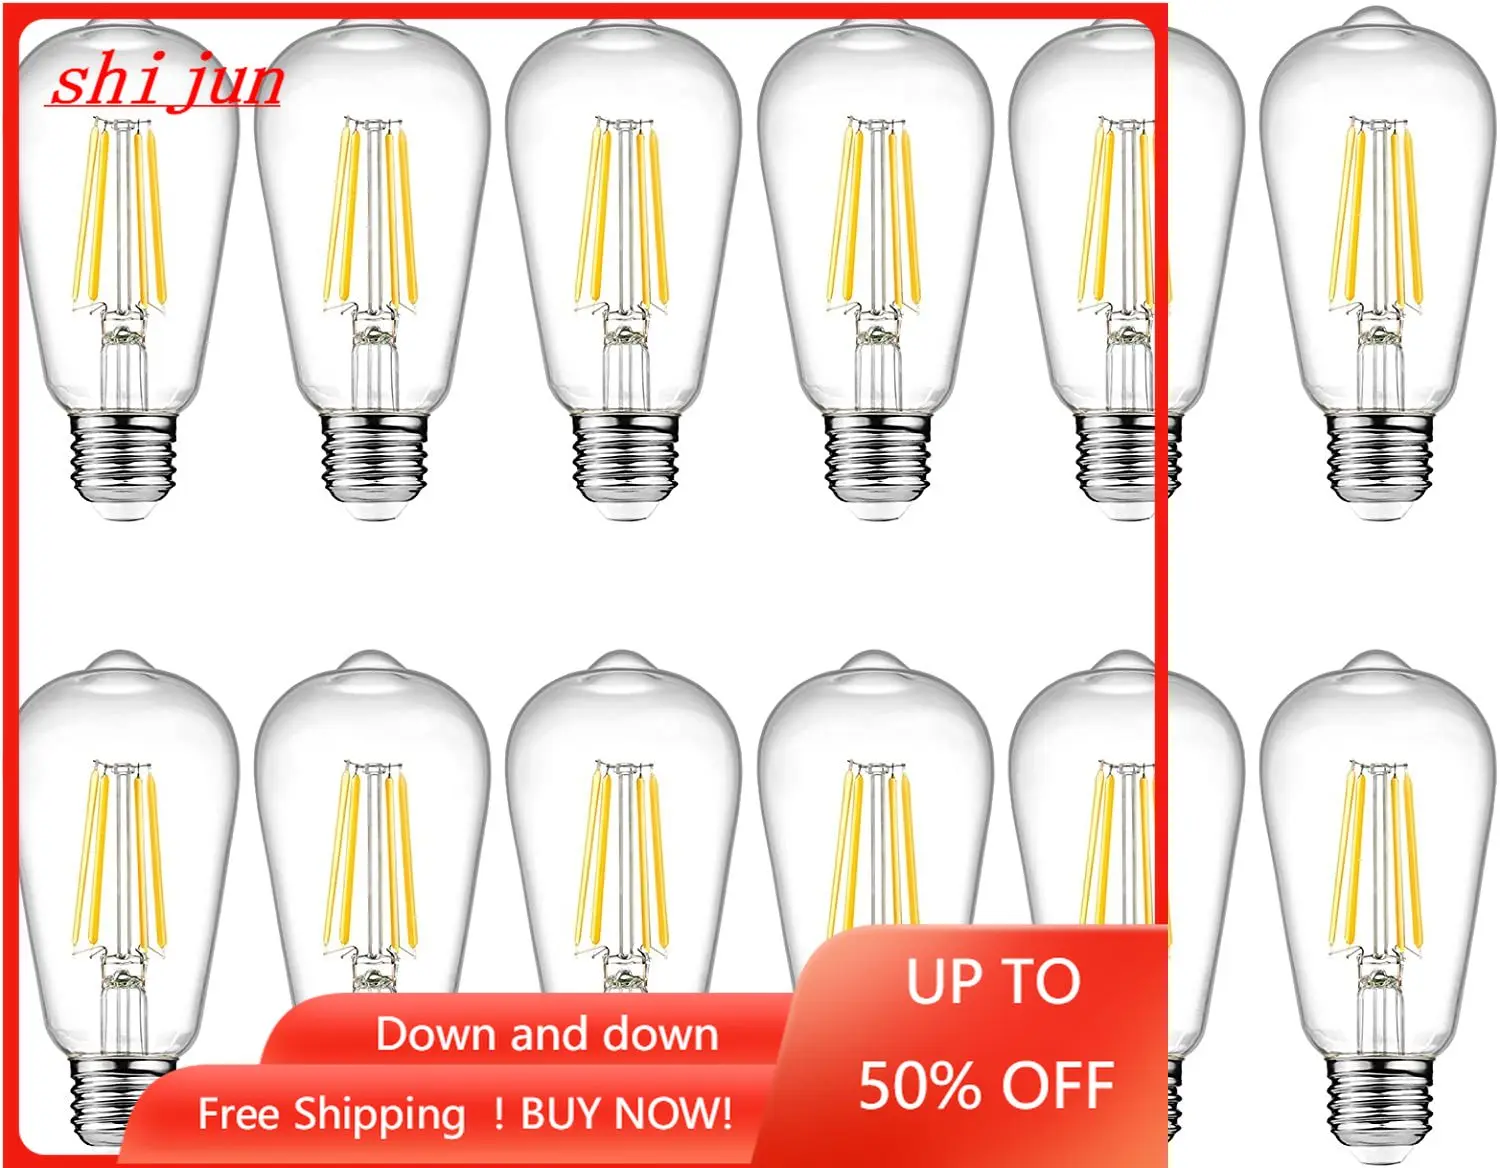 

Dimmable Vintage LED Edison Bulbs, 6W, Equivalent 60W, High Brightness Warm White 2700K, ST58 Antique LED Filament Bulbs,